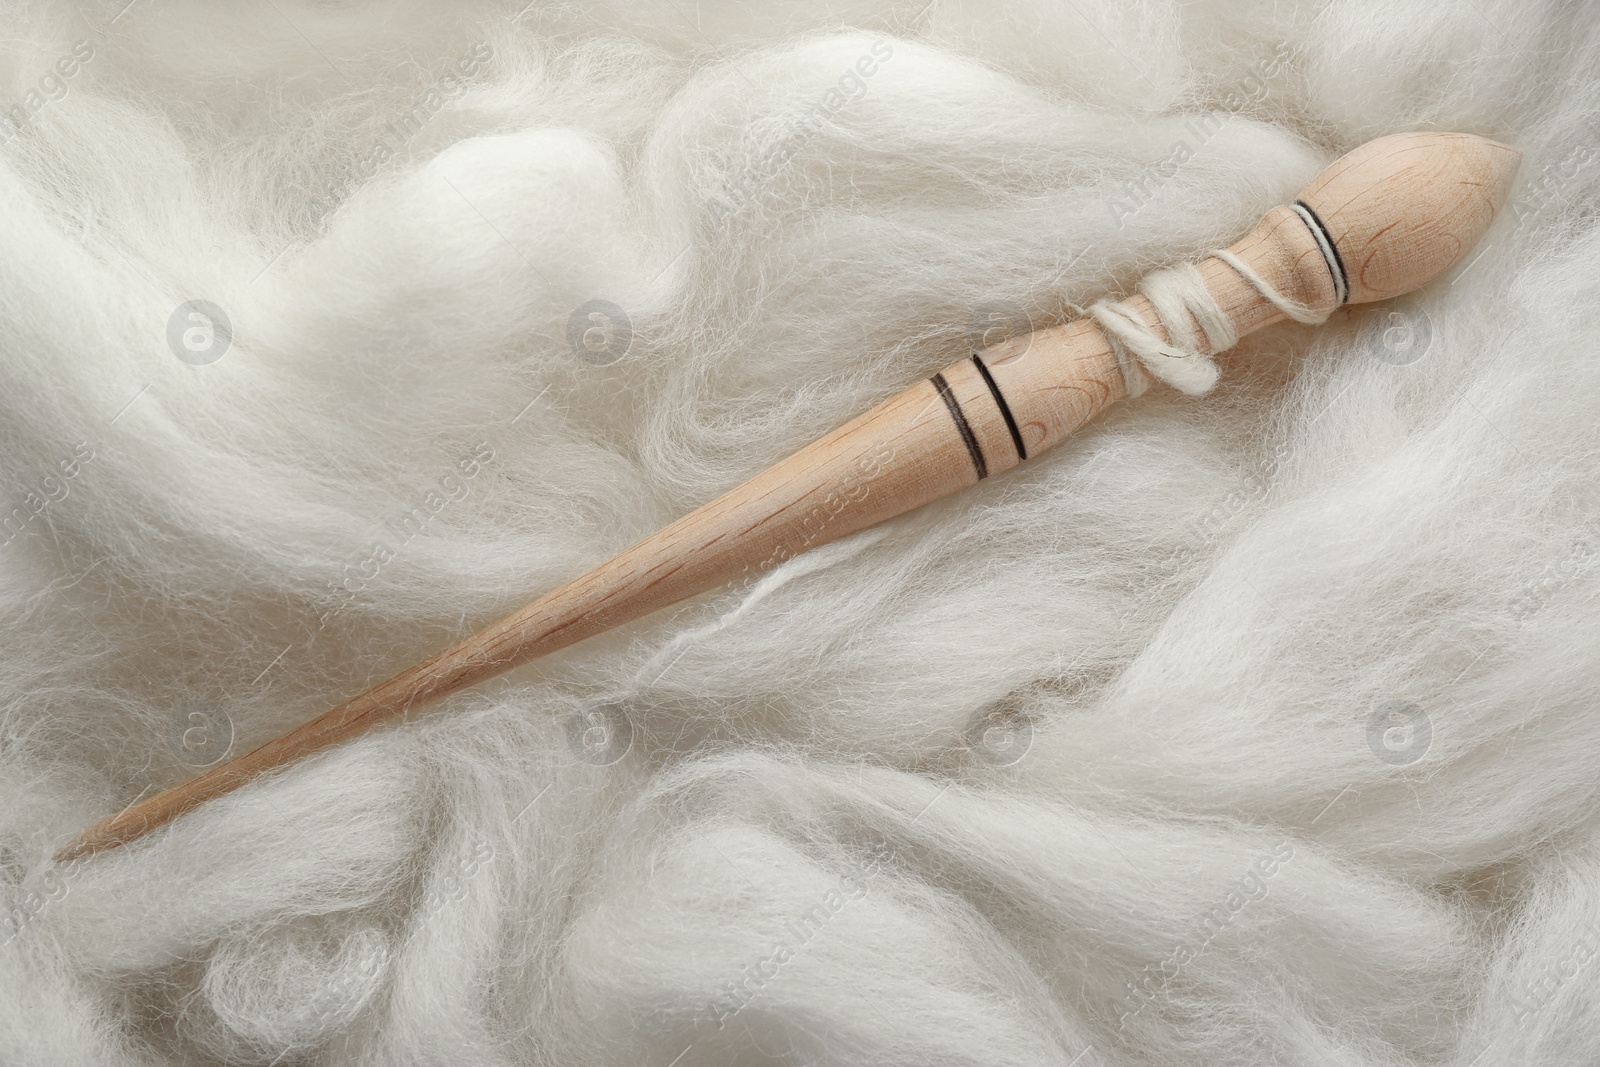 Photo of Soft white wool with spindle as background, top view